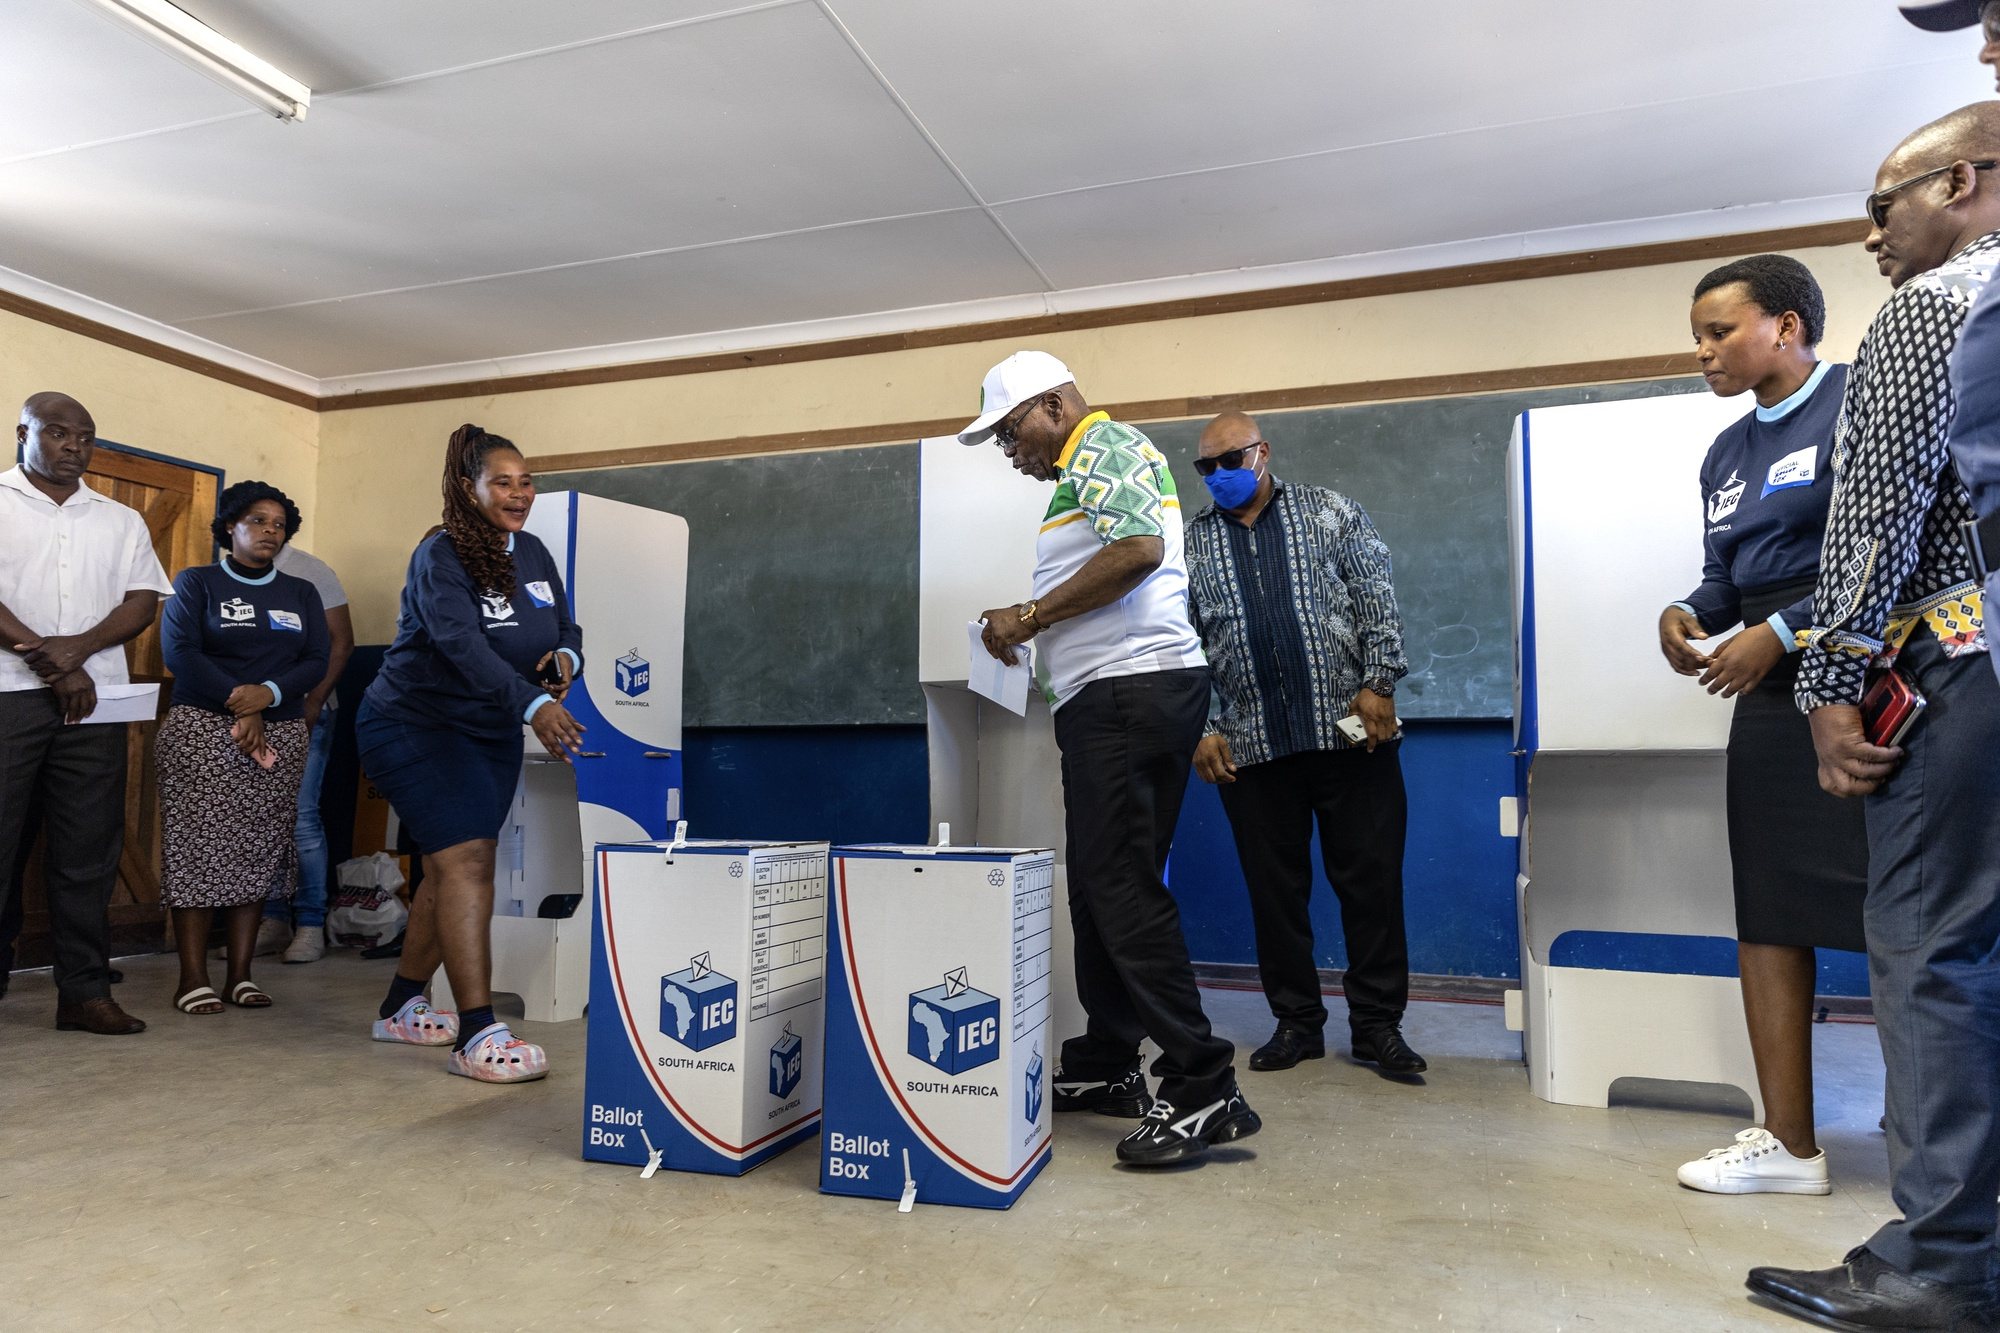 epa11377134 Former South African President Jacob Zuma (C) prepares to cast his vote during the South African general election in Nkandla, northern KwaZulu-Natal province, South Africa, 29 May 2024. Over 27 million citizens are registered to vote in the national and provincial elections to elect a new National Assembly and state legislatures, according to the Electoral Commission of South Africa. South Africans do not directly vote for the president. They vote for parties that will appoint 400 representatives to the National Assembly who will then choose the president for the next five years.  EPA/SANDILE NDLOVU